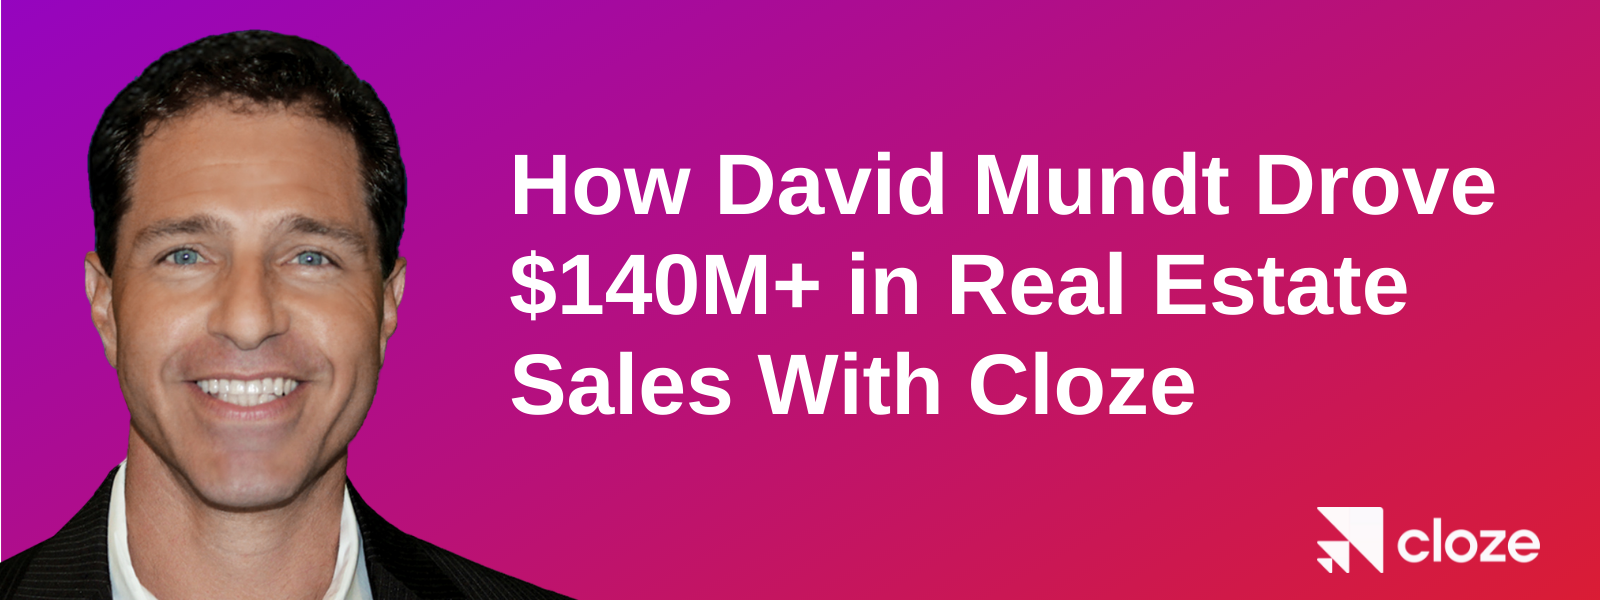 How David Mundt drove $140M+ in real estate sales with Cloze CRM